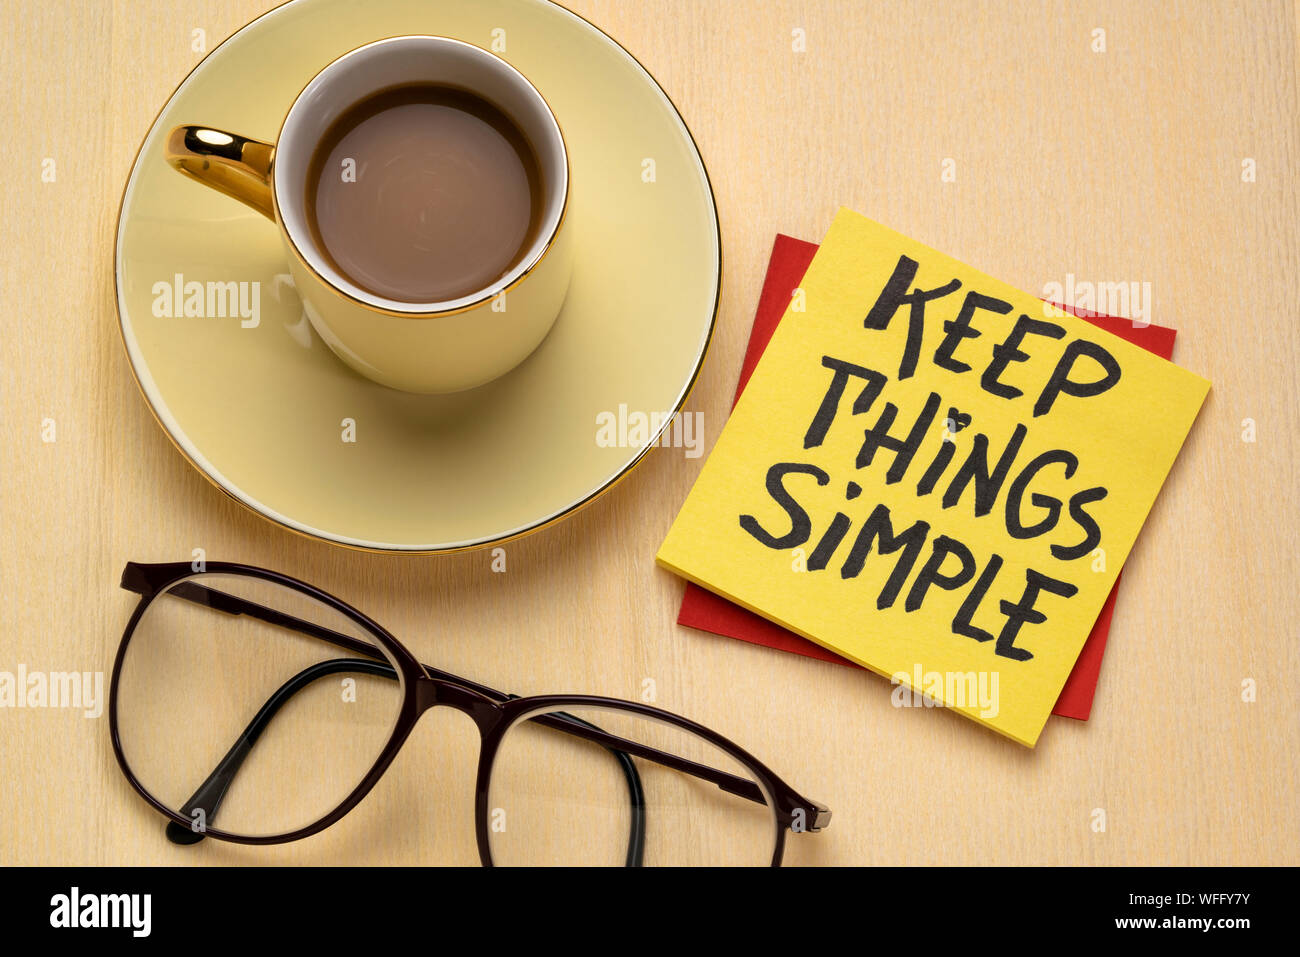 Keep things simple - handwriting on a reminder note with a cup of coffee, efficiency or minimalism concept Stock Photo